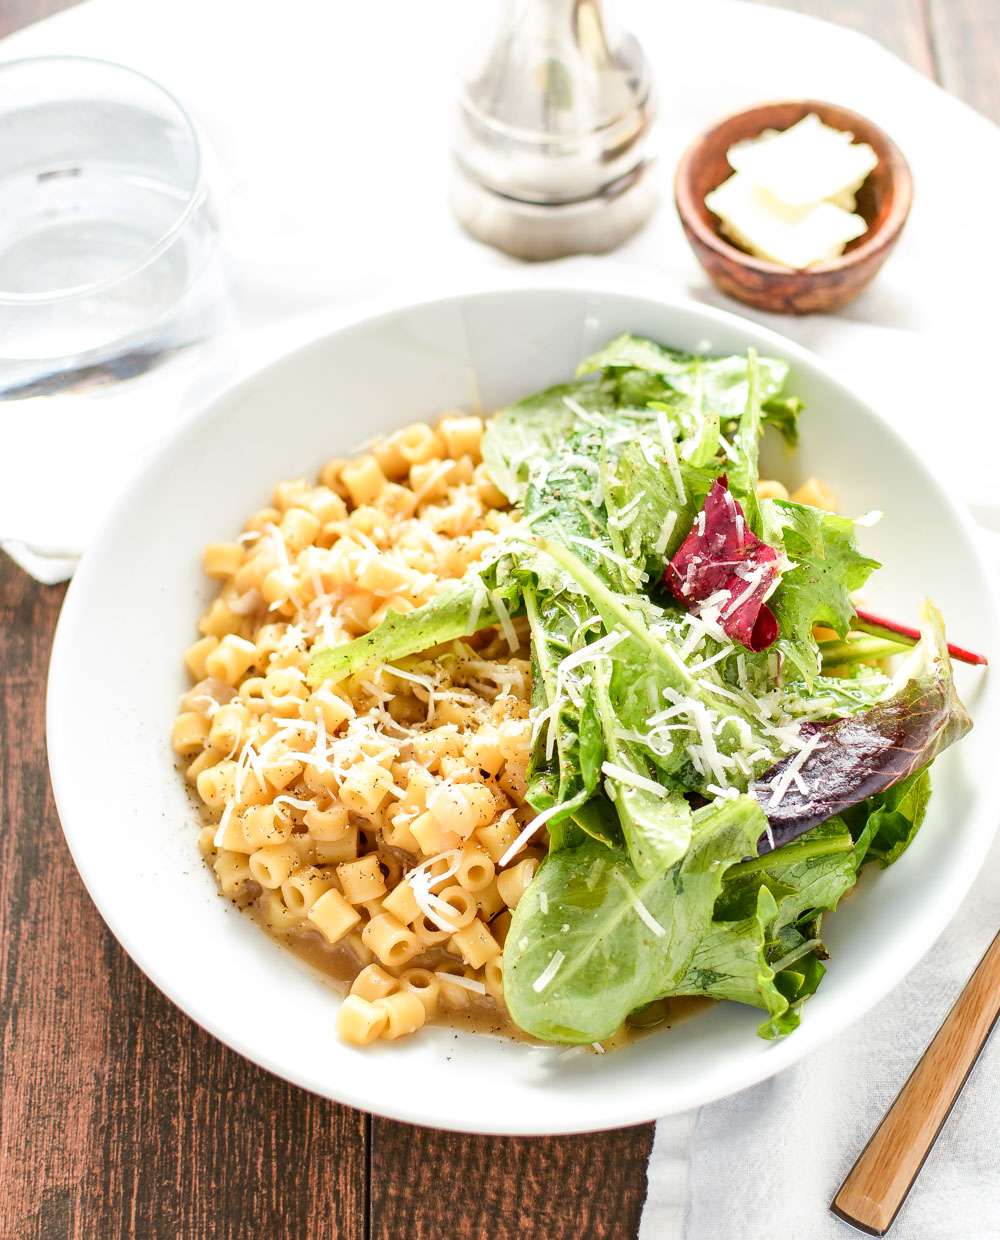 Cheesy Ditalini with Mixed Greens is the perfect light lunch!